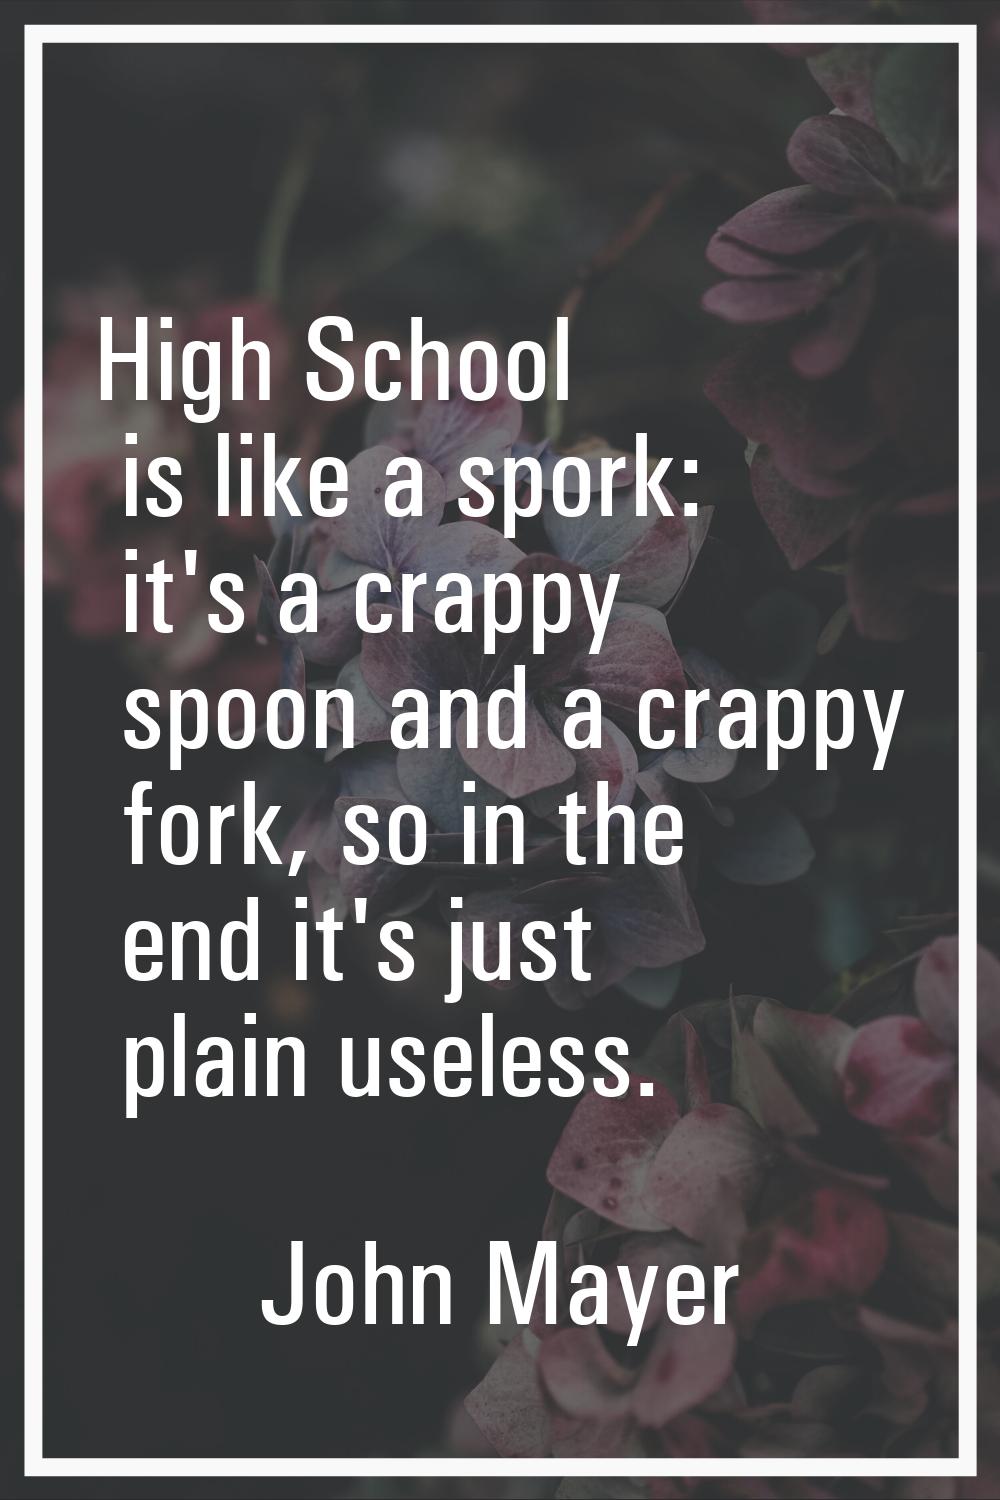 High School is like a spork: it's a crappy spoon and a crappy fork, so in the end it's just plain u